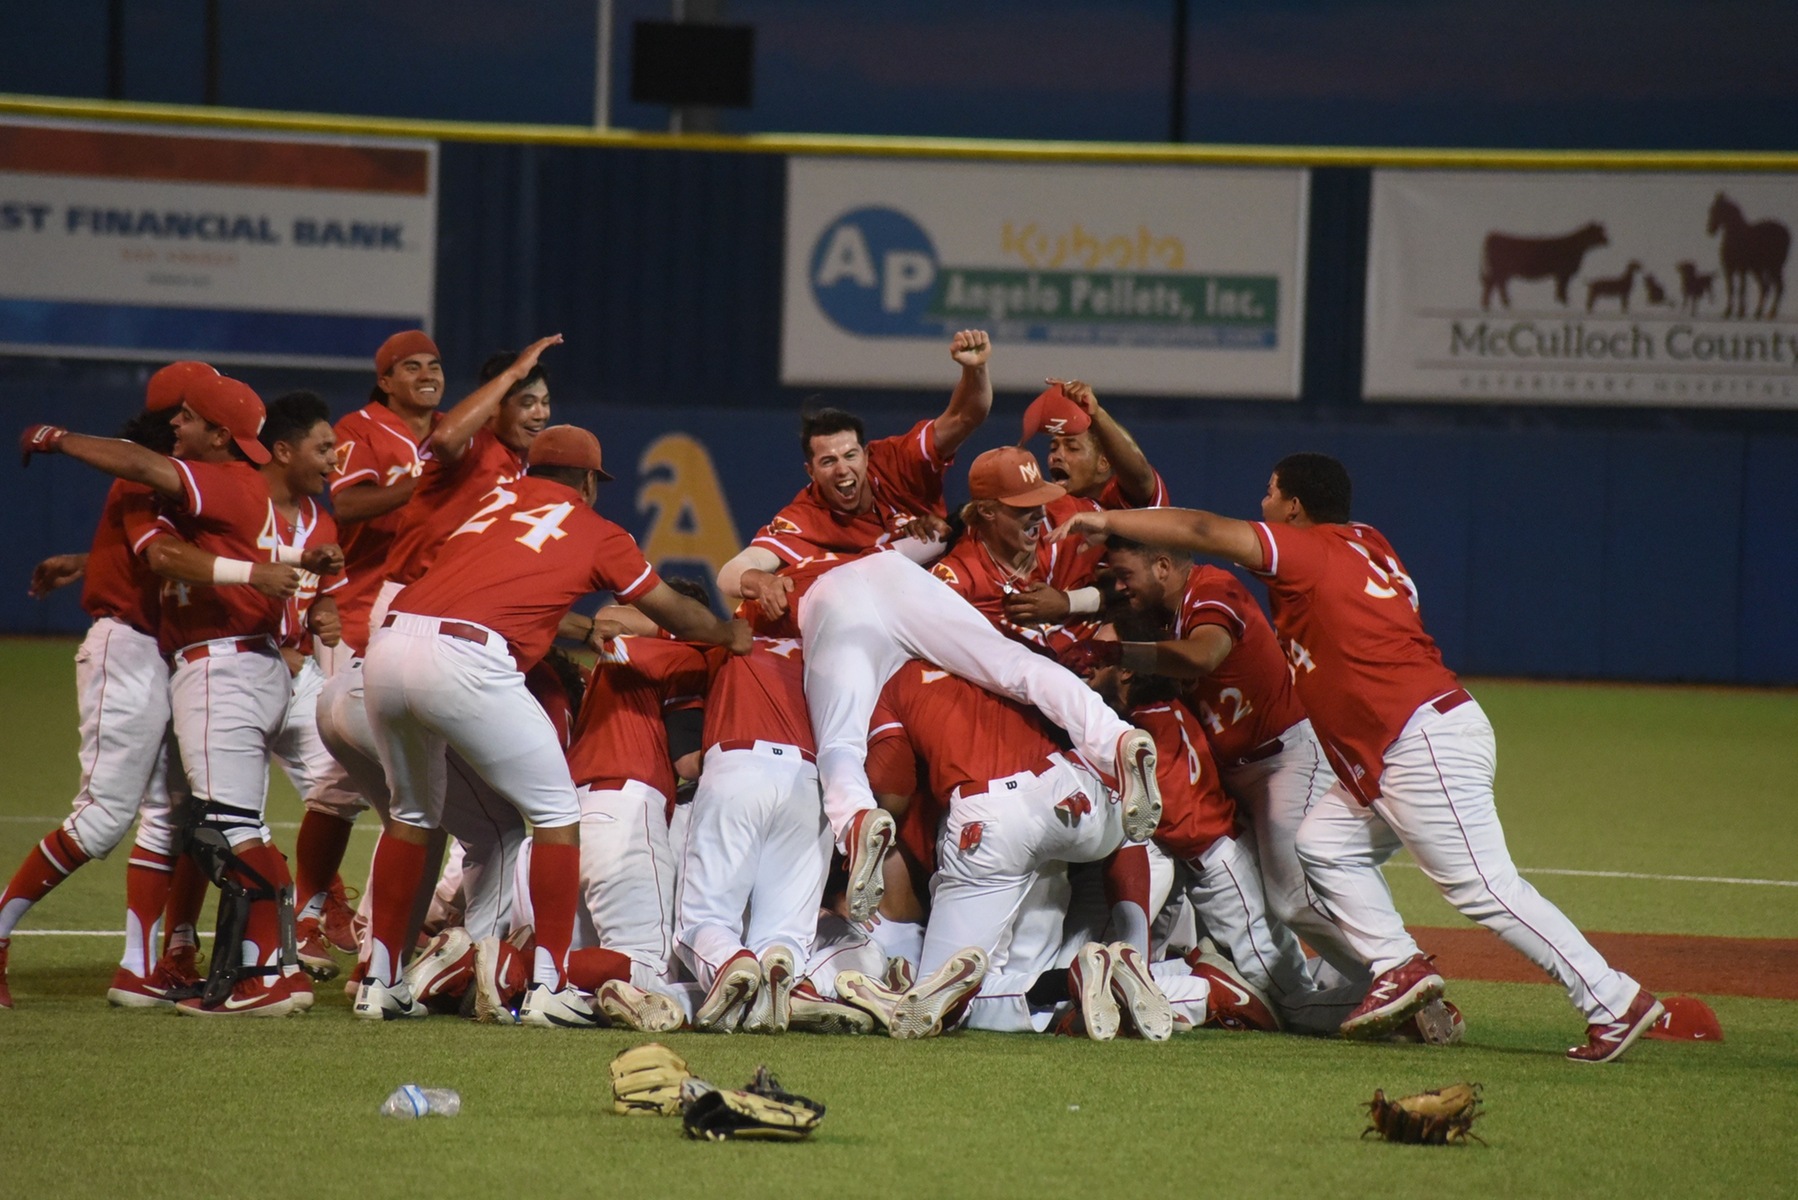 Regional tournament win gives NMJC chance to win national championship